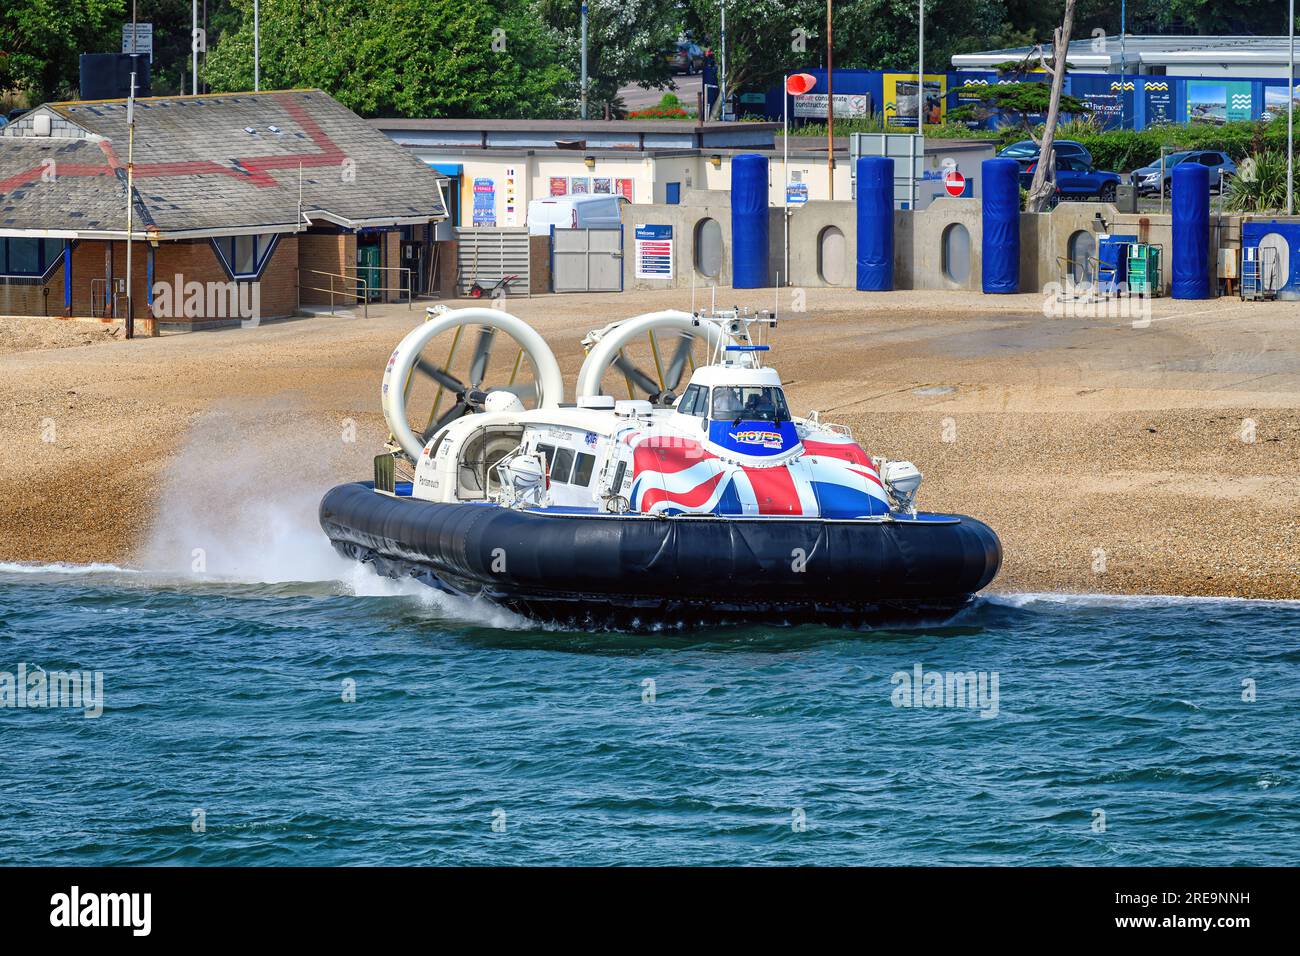 Solent Flyer is a hovercraft operated by Hovertravel providing a regular passenger service between Portsmouth and Ryde on the Isle of Wight. Stock Photo